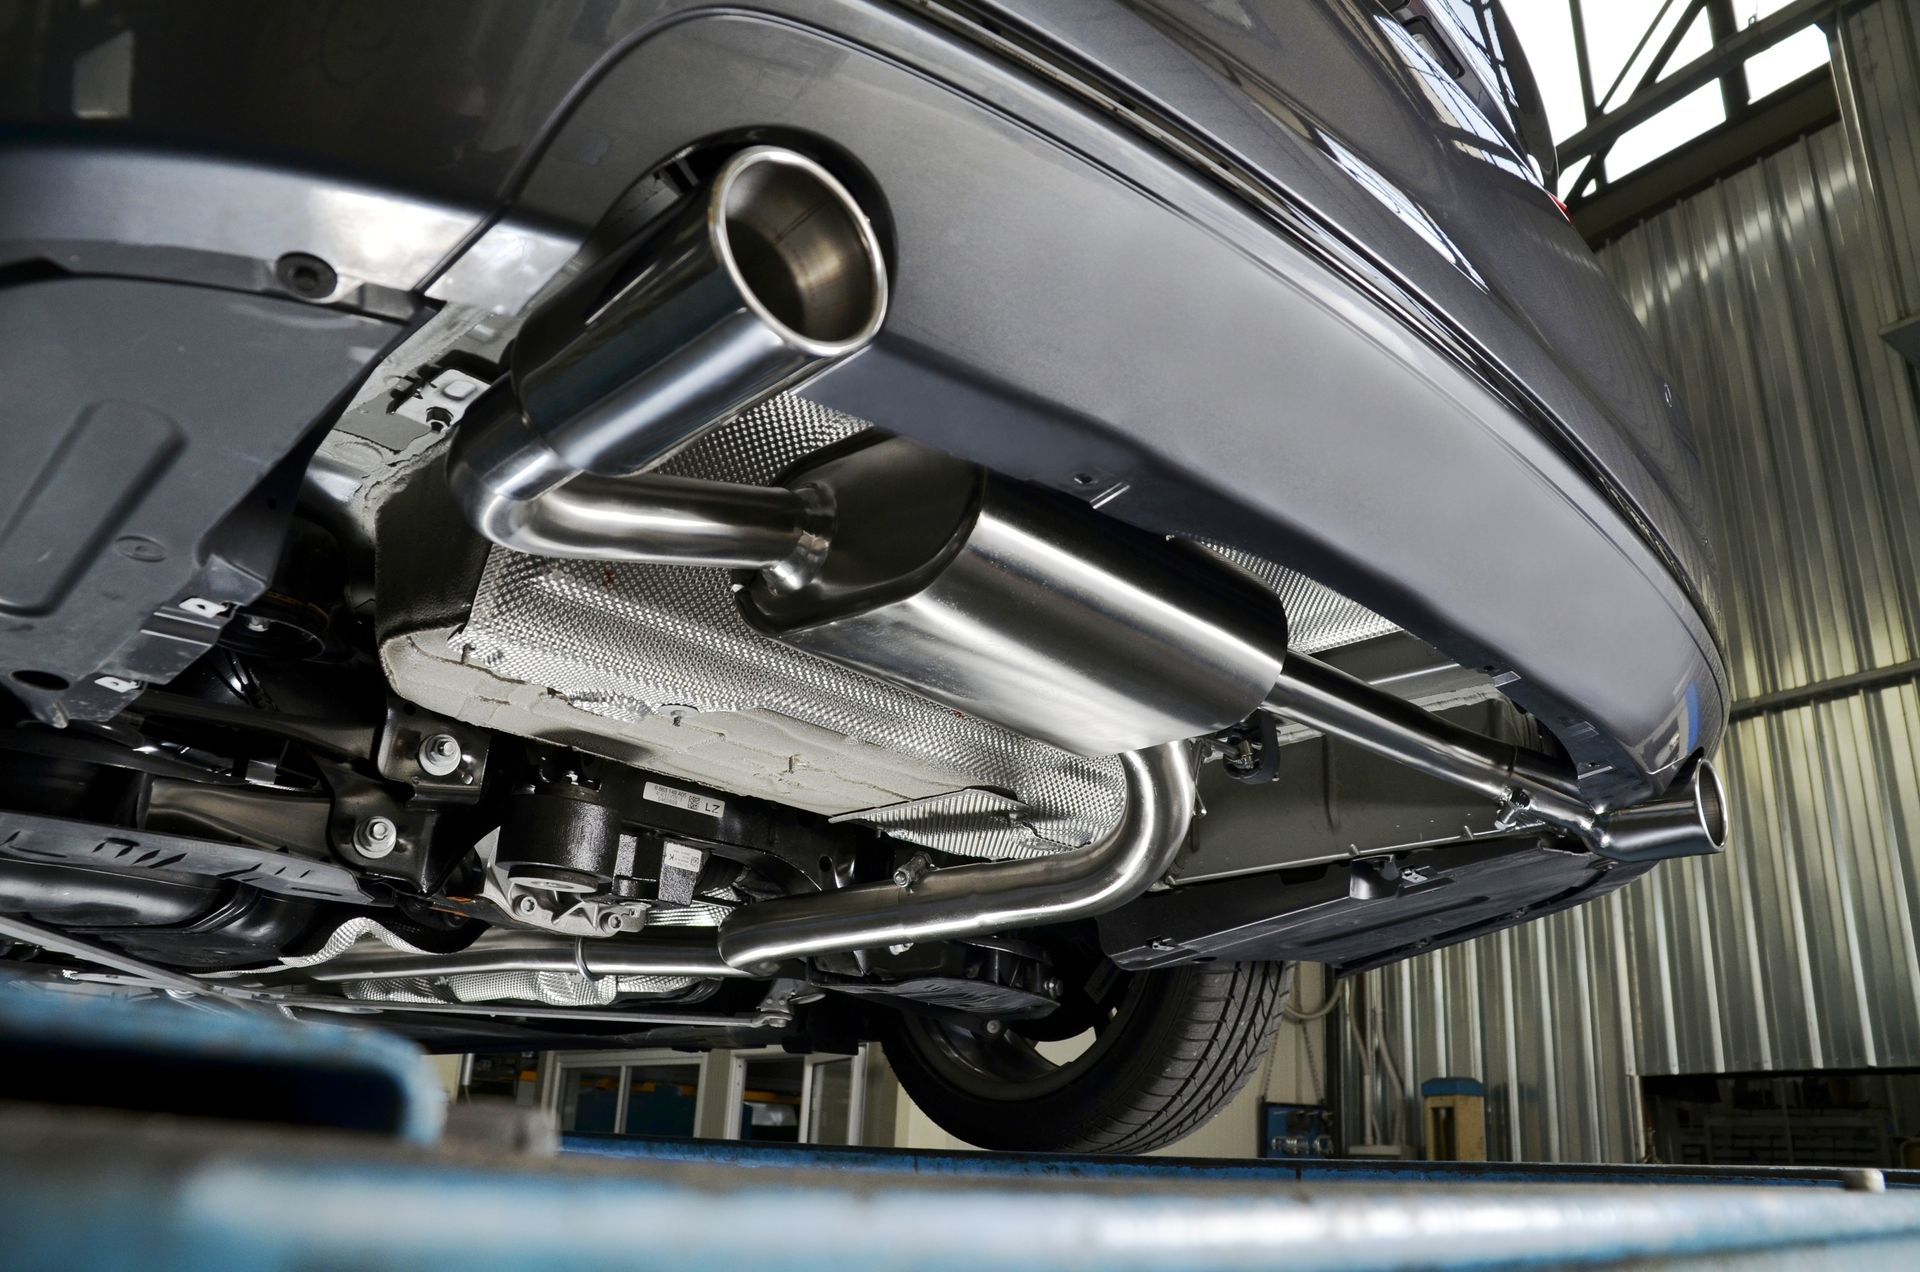 Exhaust Service at ﻿Diamond Automotive Center﻿ in ﻿Billings, MT﻿